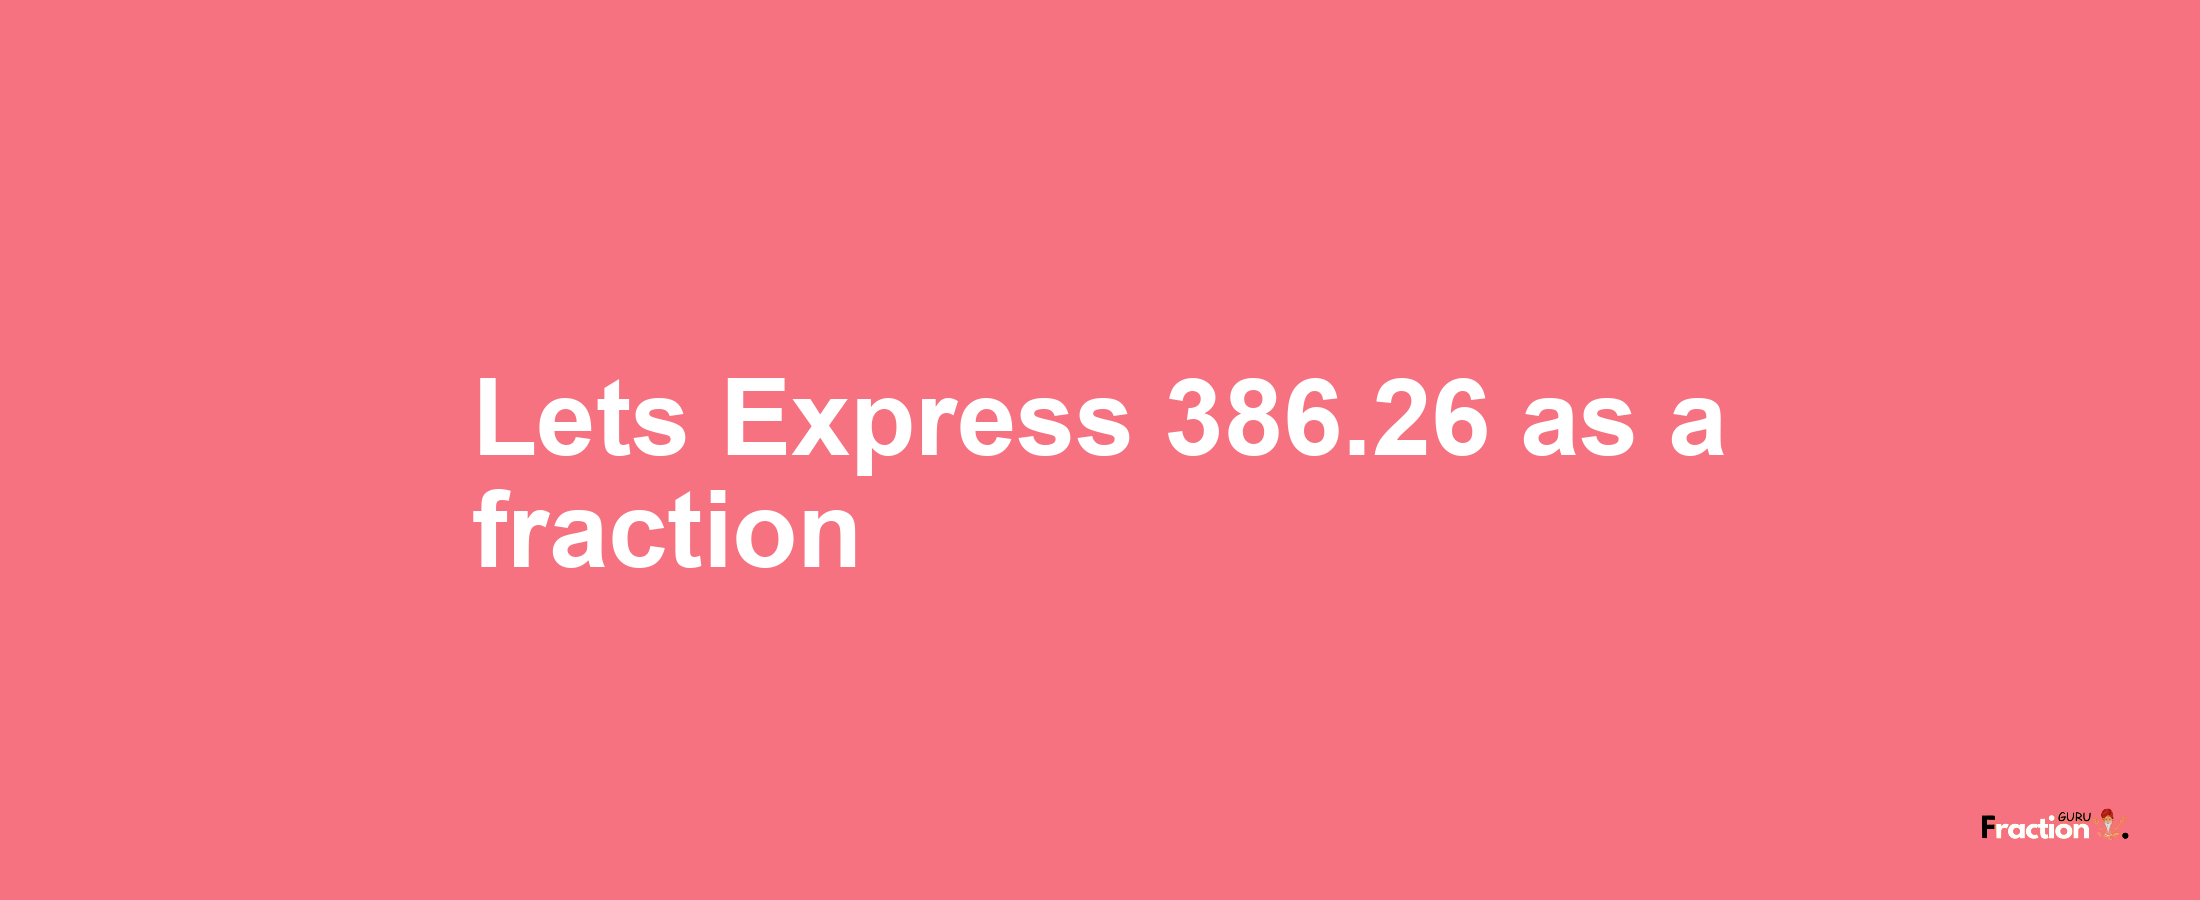 Lets Express 386.26 as afraction